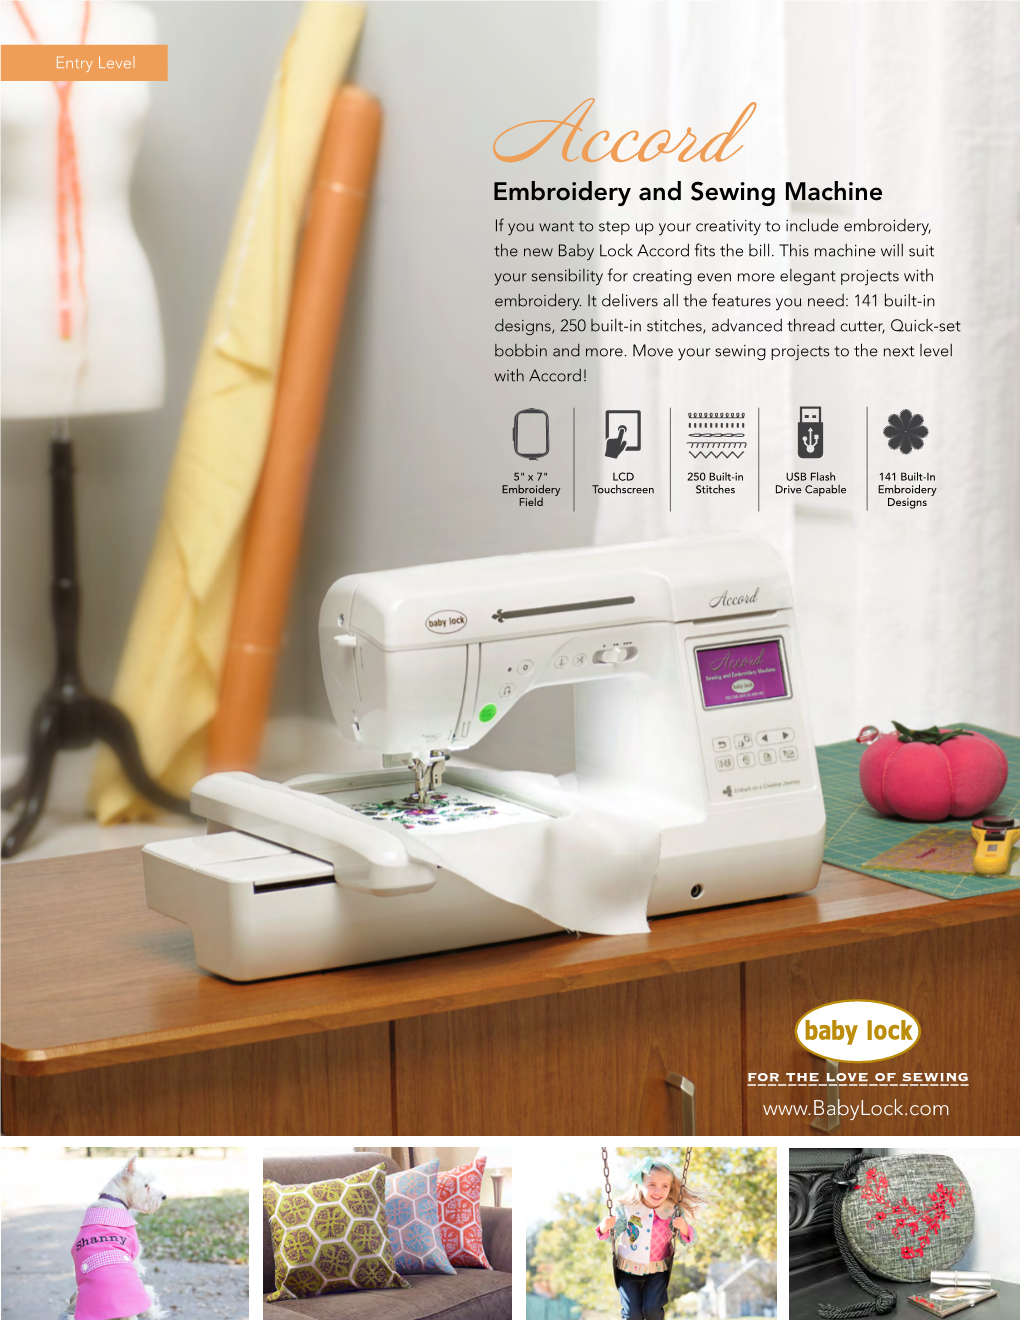 Embroidery and Sewing Machine If You Want to Step up Your Creativity to Include Embroidery, the New Baby Lock Accord Fits the Bill